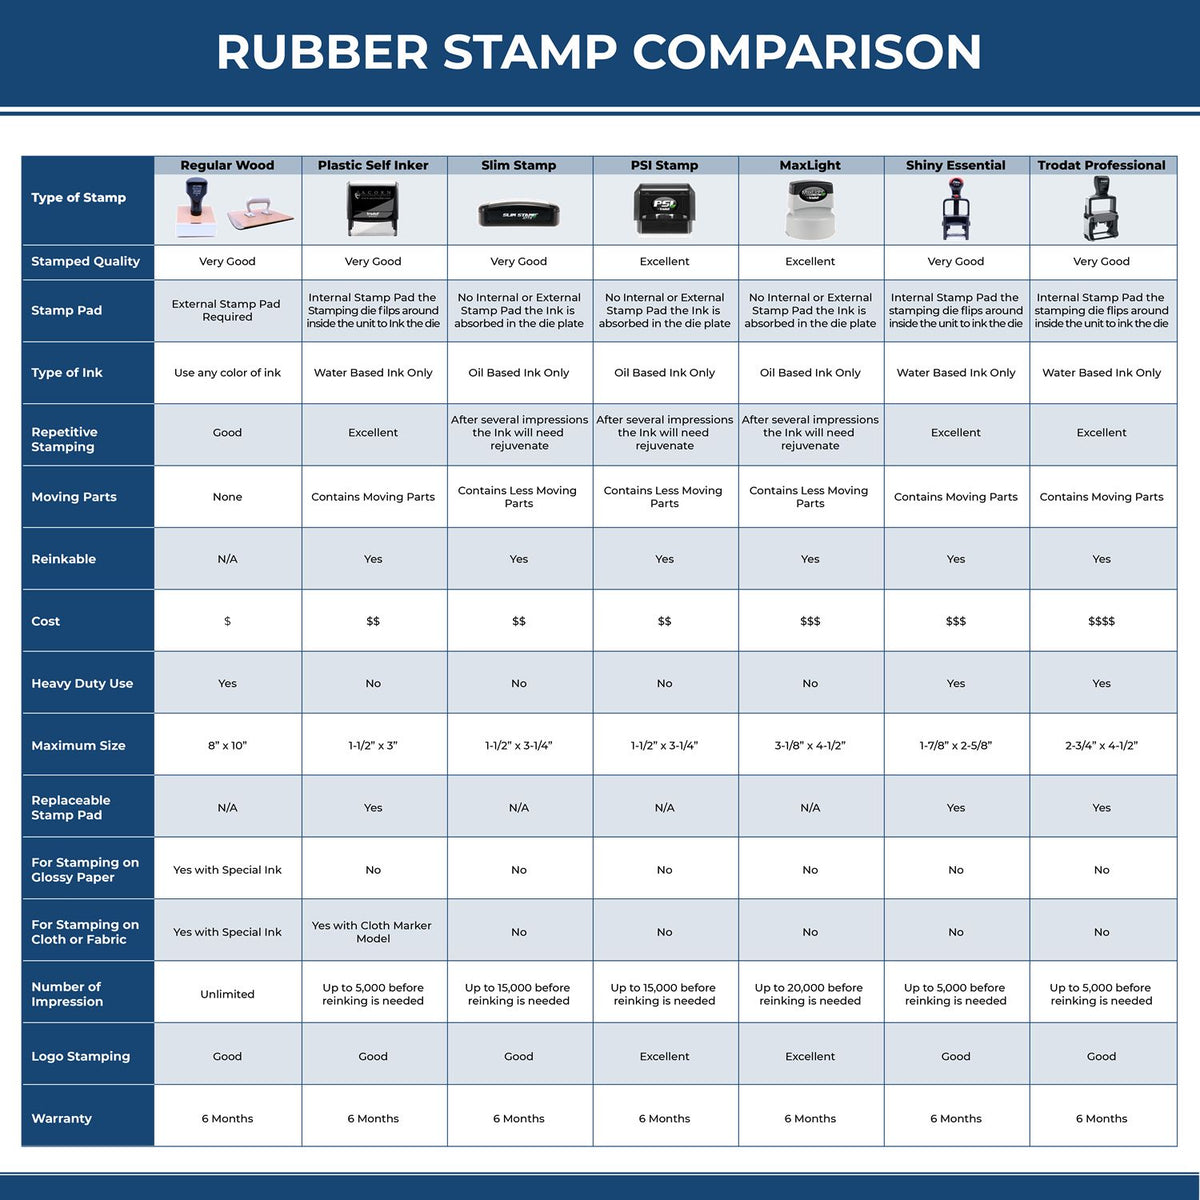 Large Self-Inking Banco Stamp 5557S Rubber Stamp Comparison